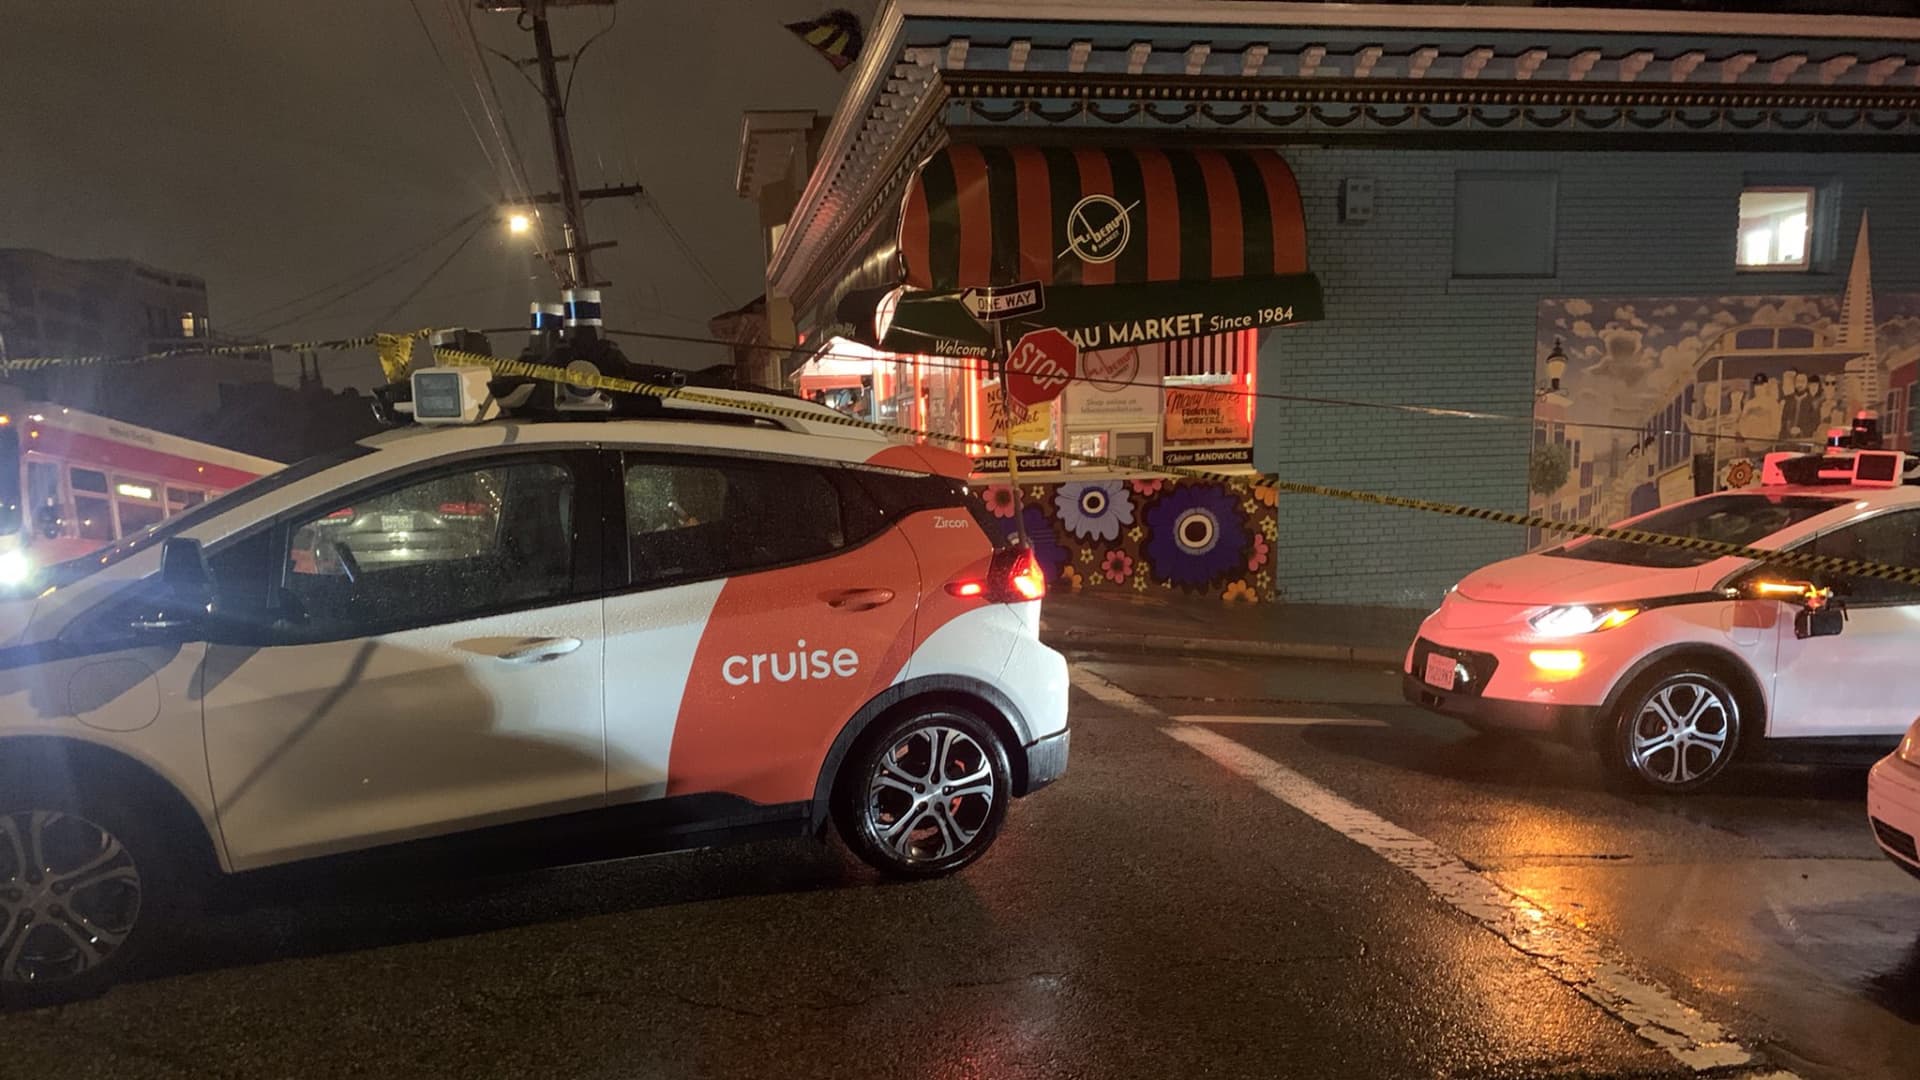 Cruise robotaxis blocked a road in San Francisco after storm